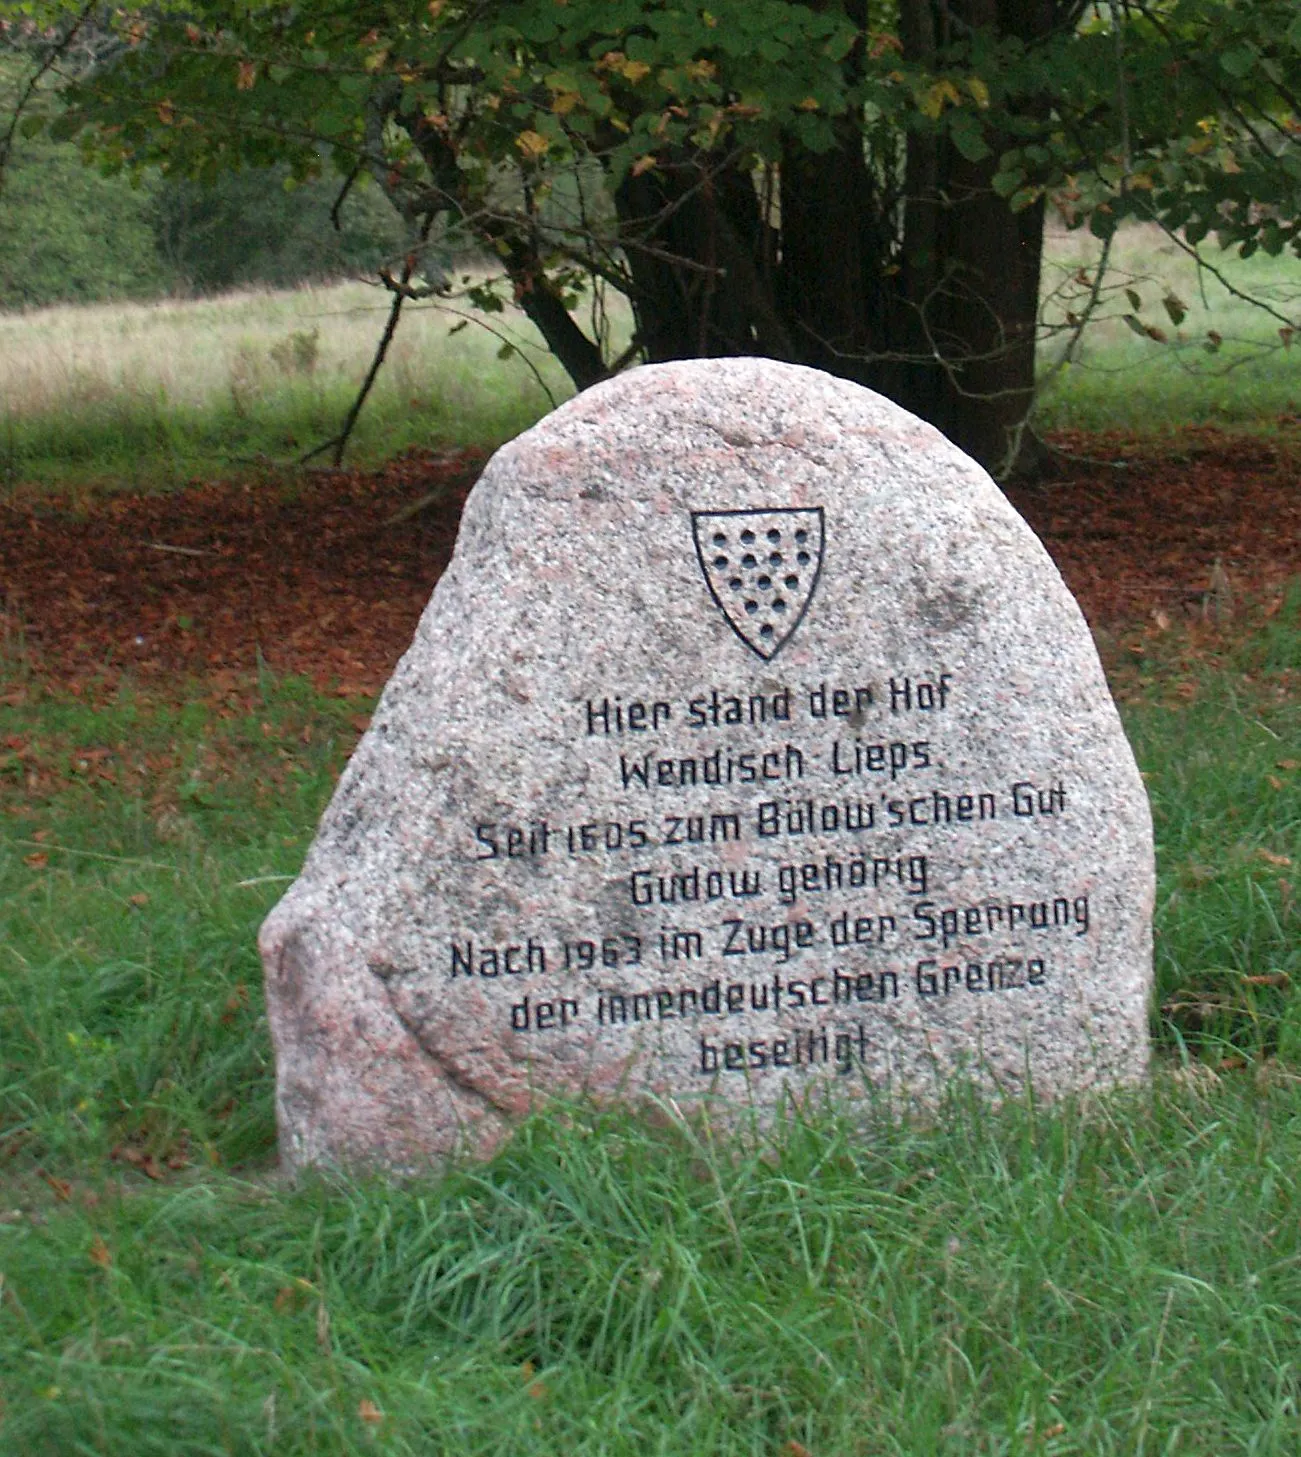 Photo showing: Memorial for the 1963 deserted village of Wendisch Lieps